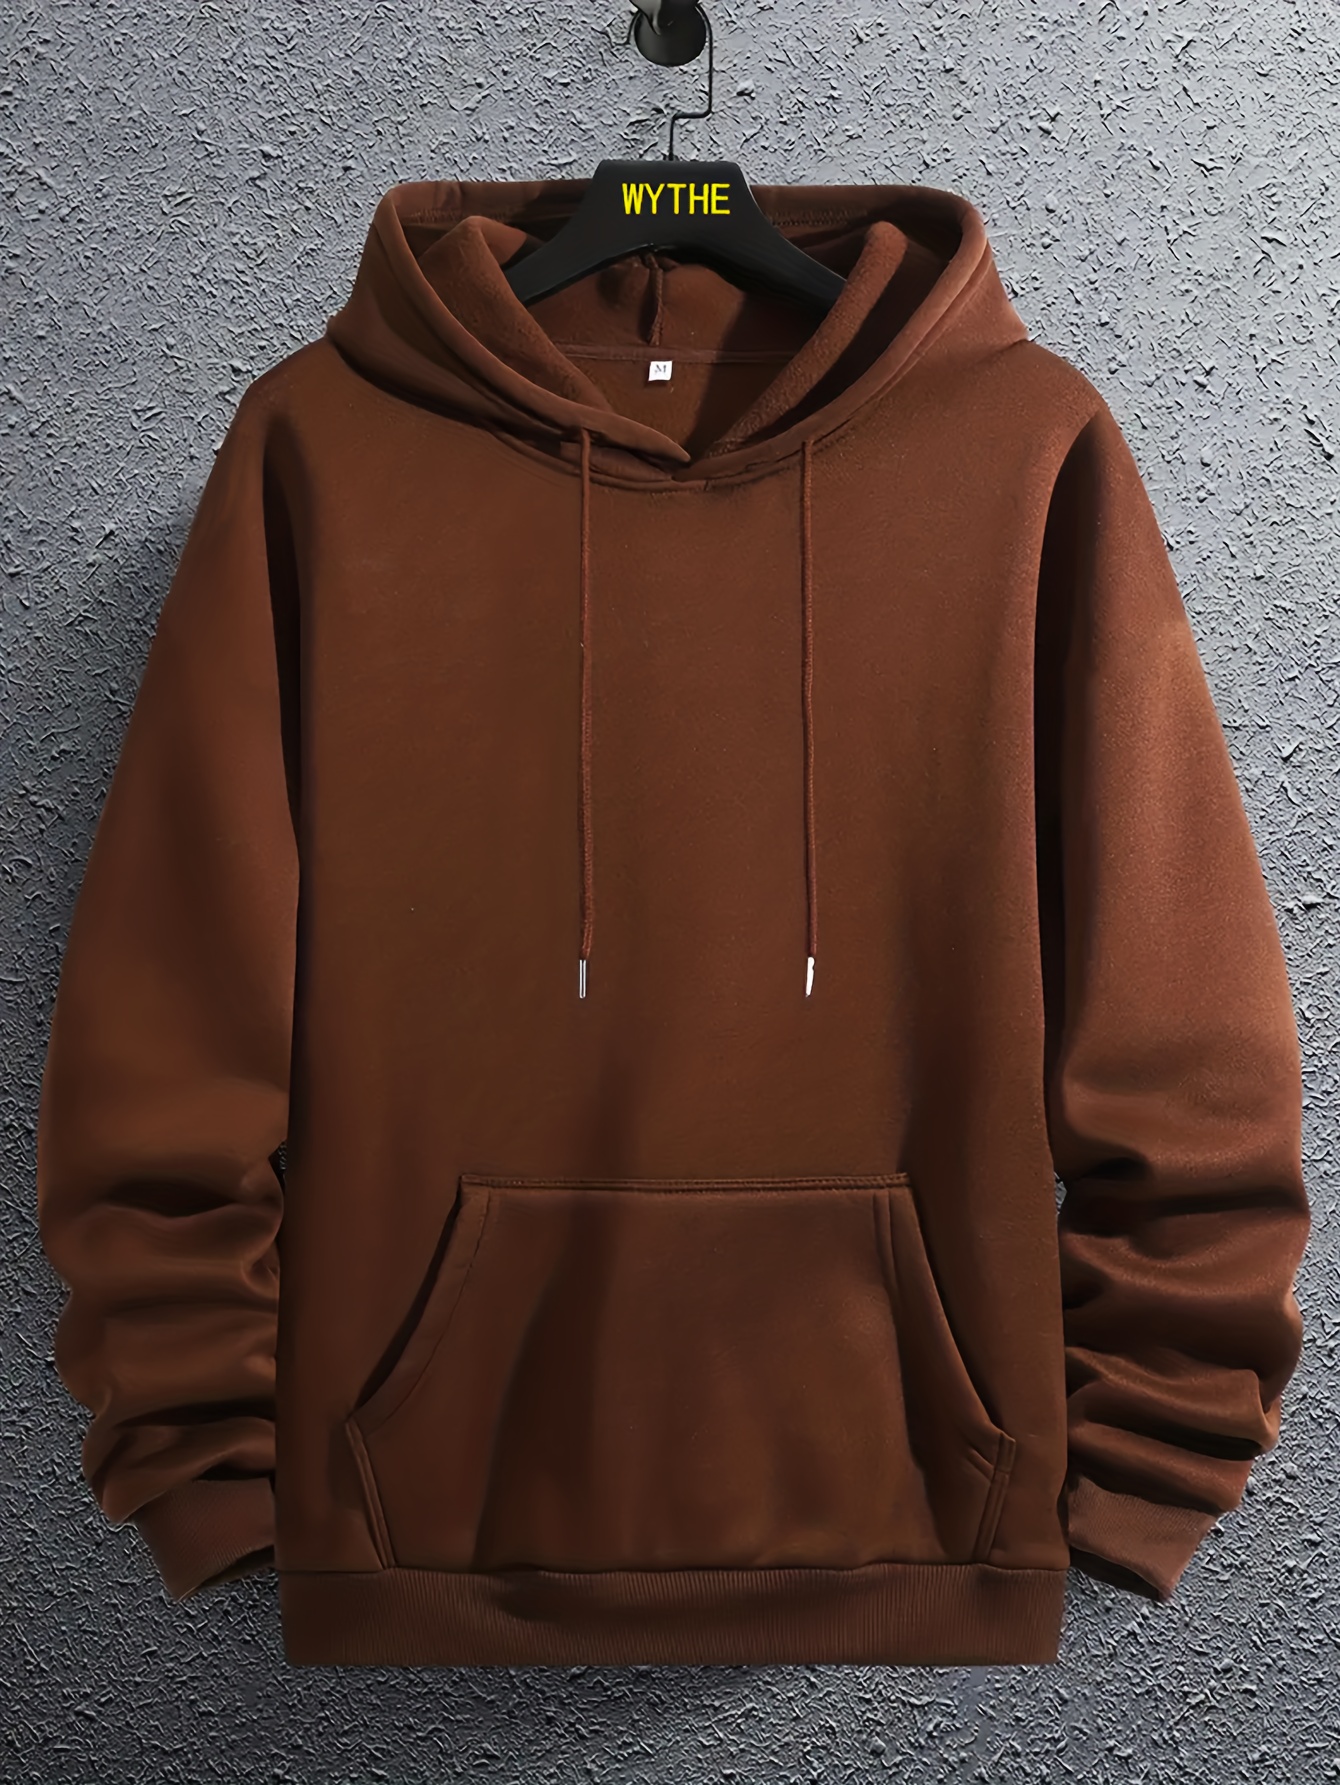 solid color hoodies, solid color hoodies for men graphic hoodie with kangaroo pocket comfy loose drawstring trendy hooded pullover mens clothing for autumn winter details 0